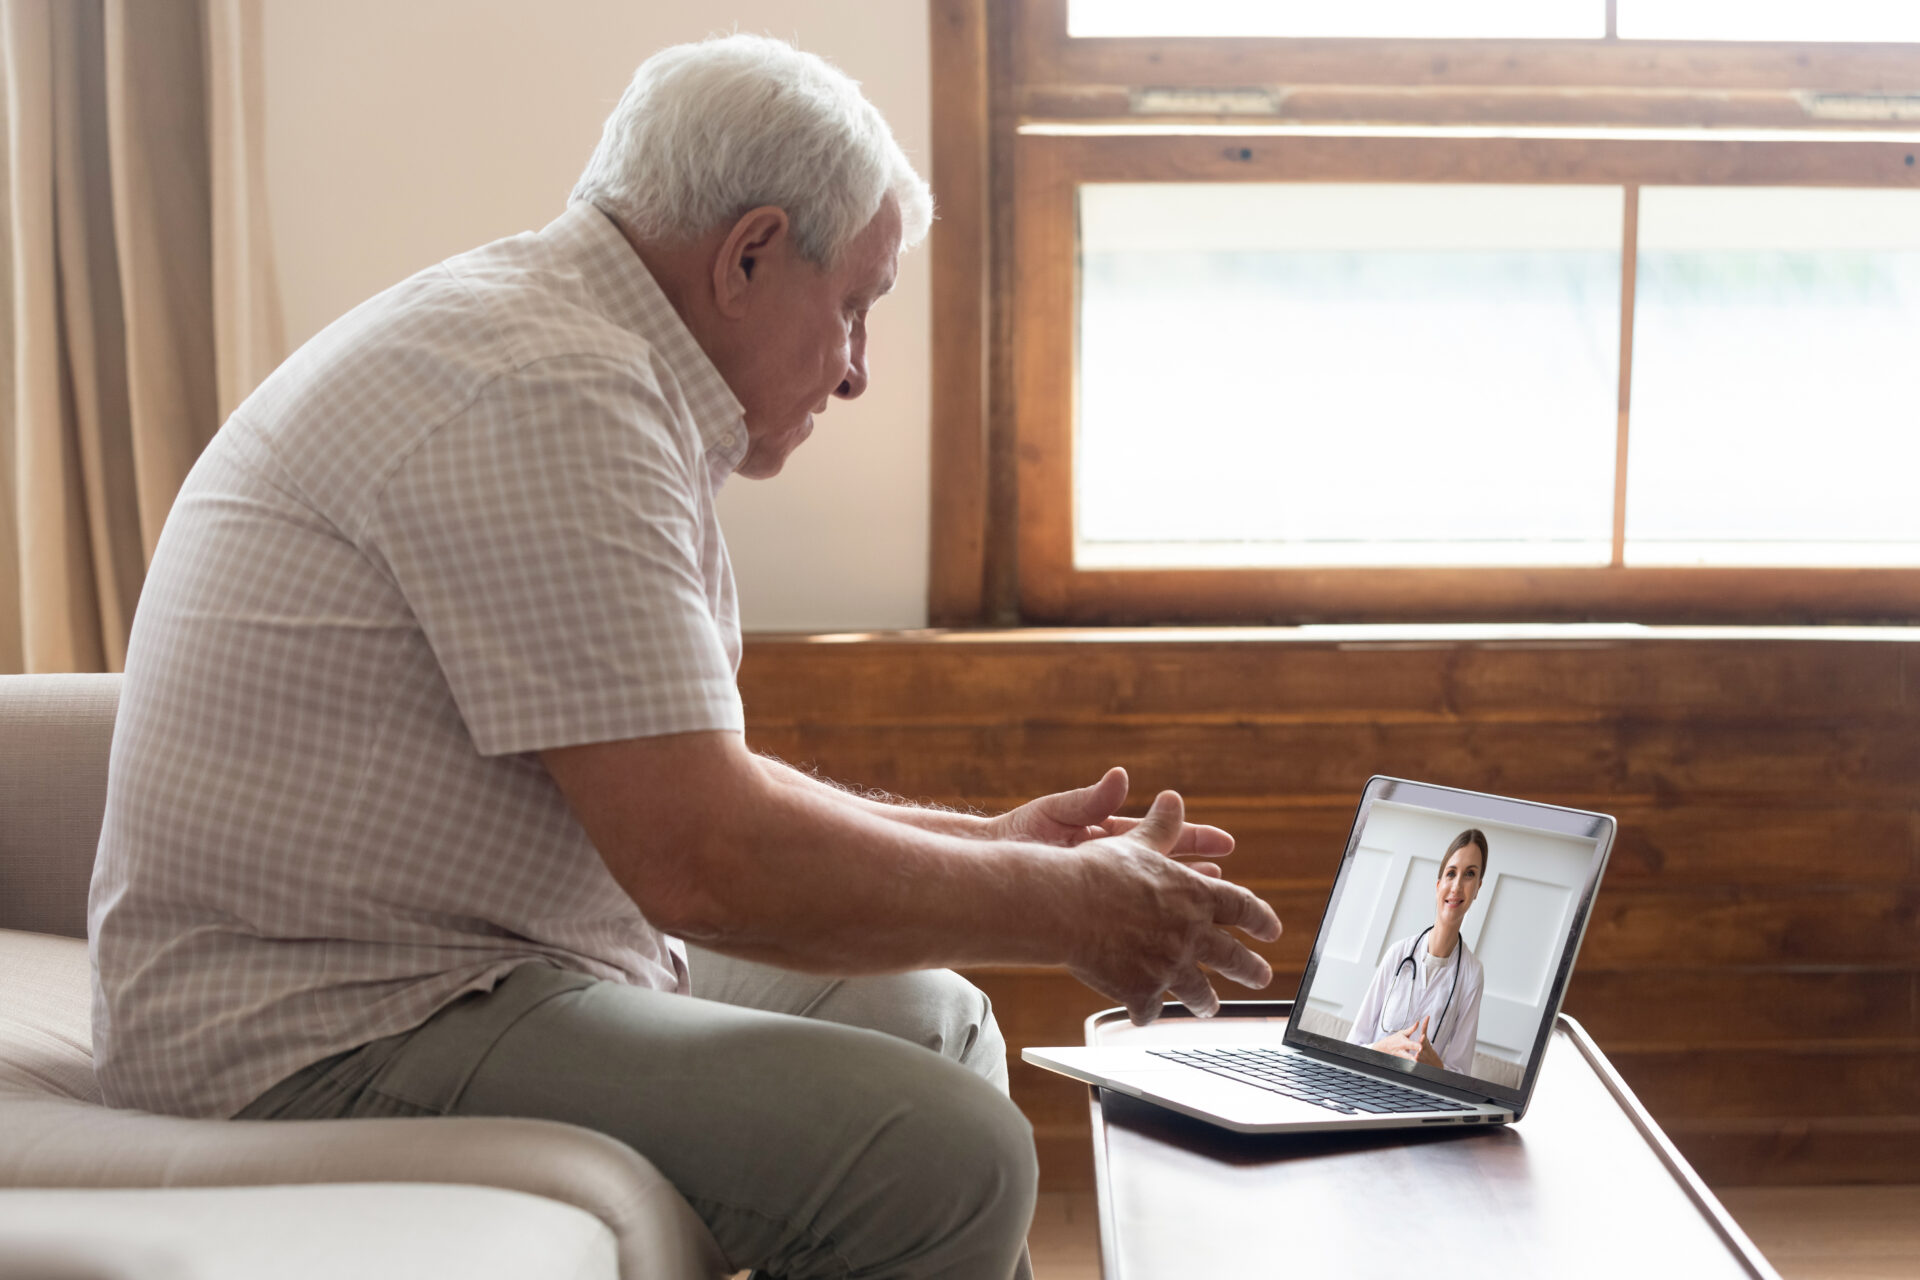 An elderly man wearing a white, checkered shirt attends a virtual doctor's appointment in a video call with a laptop.